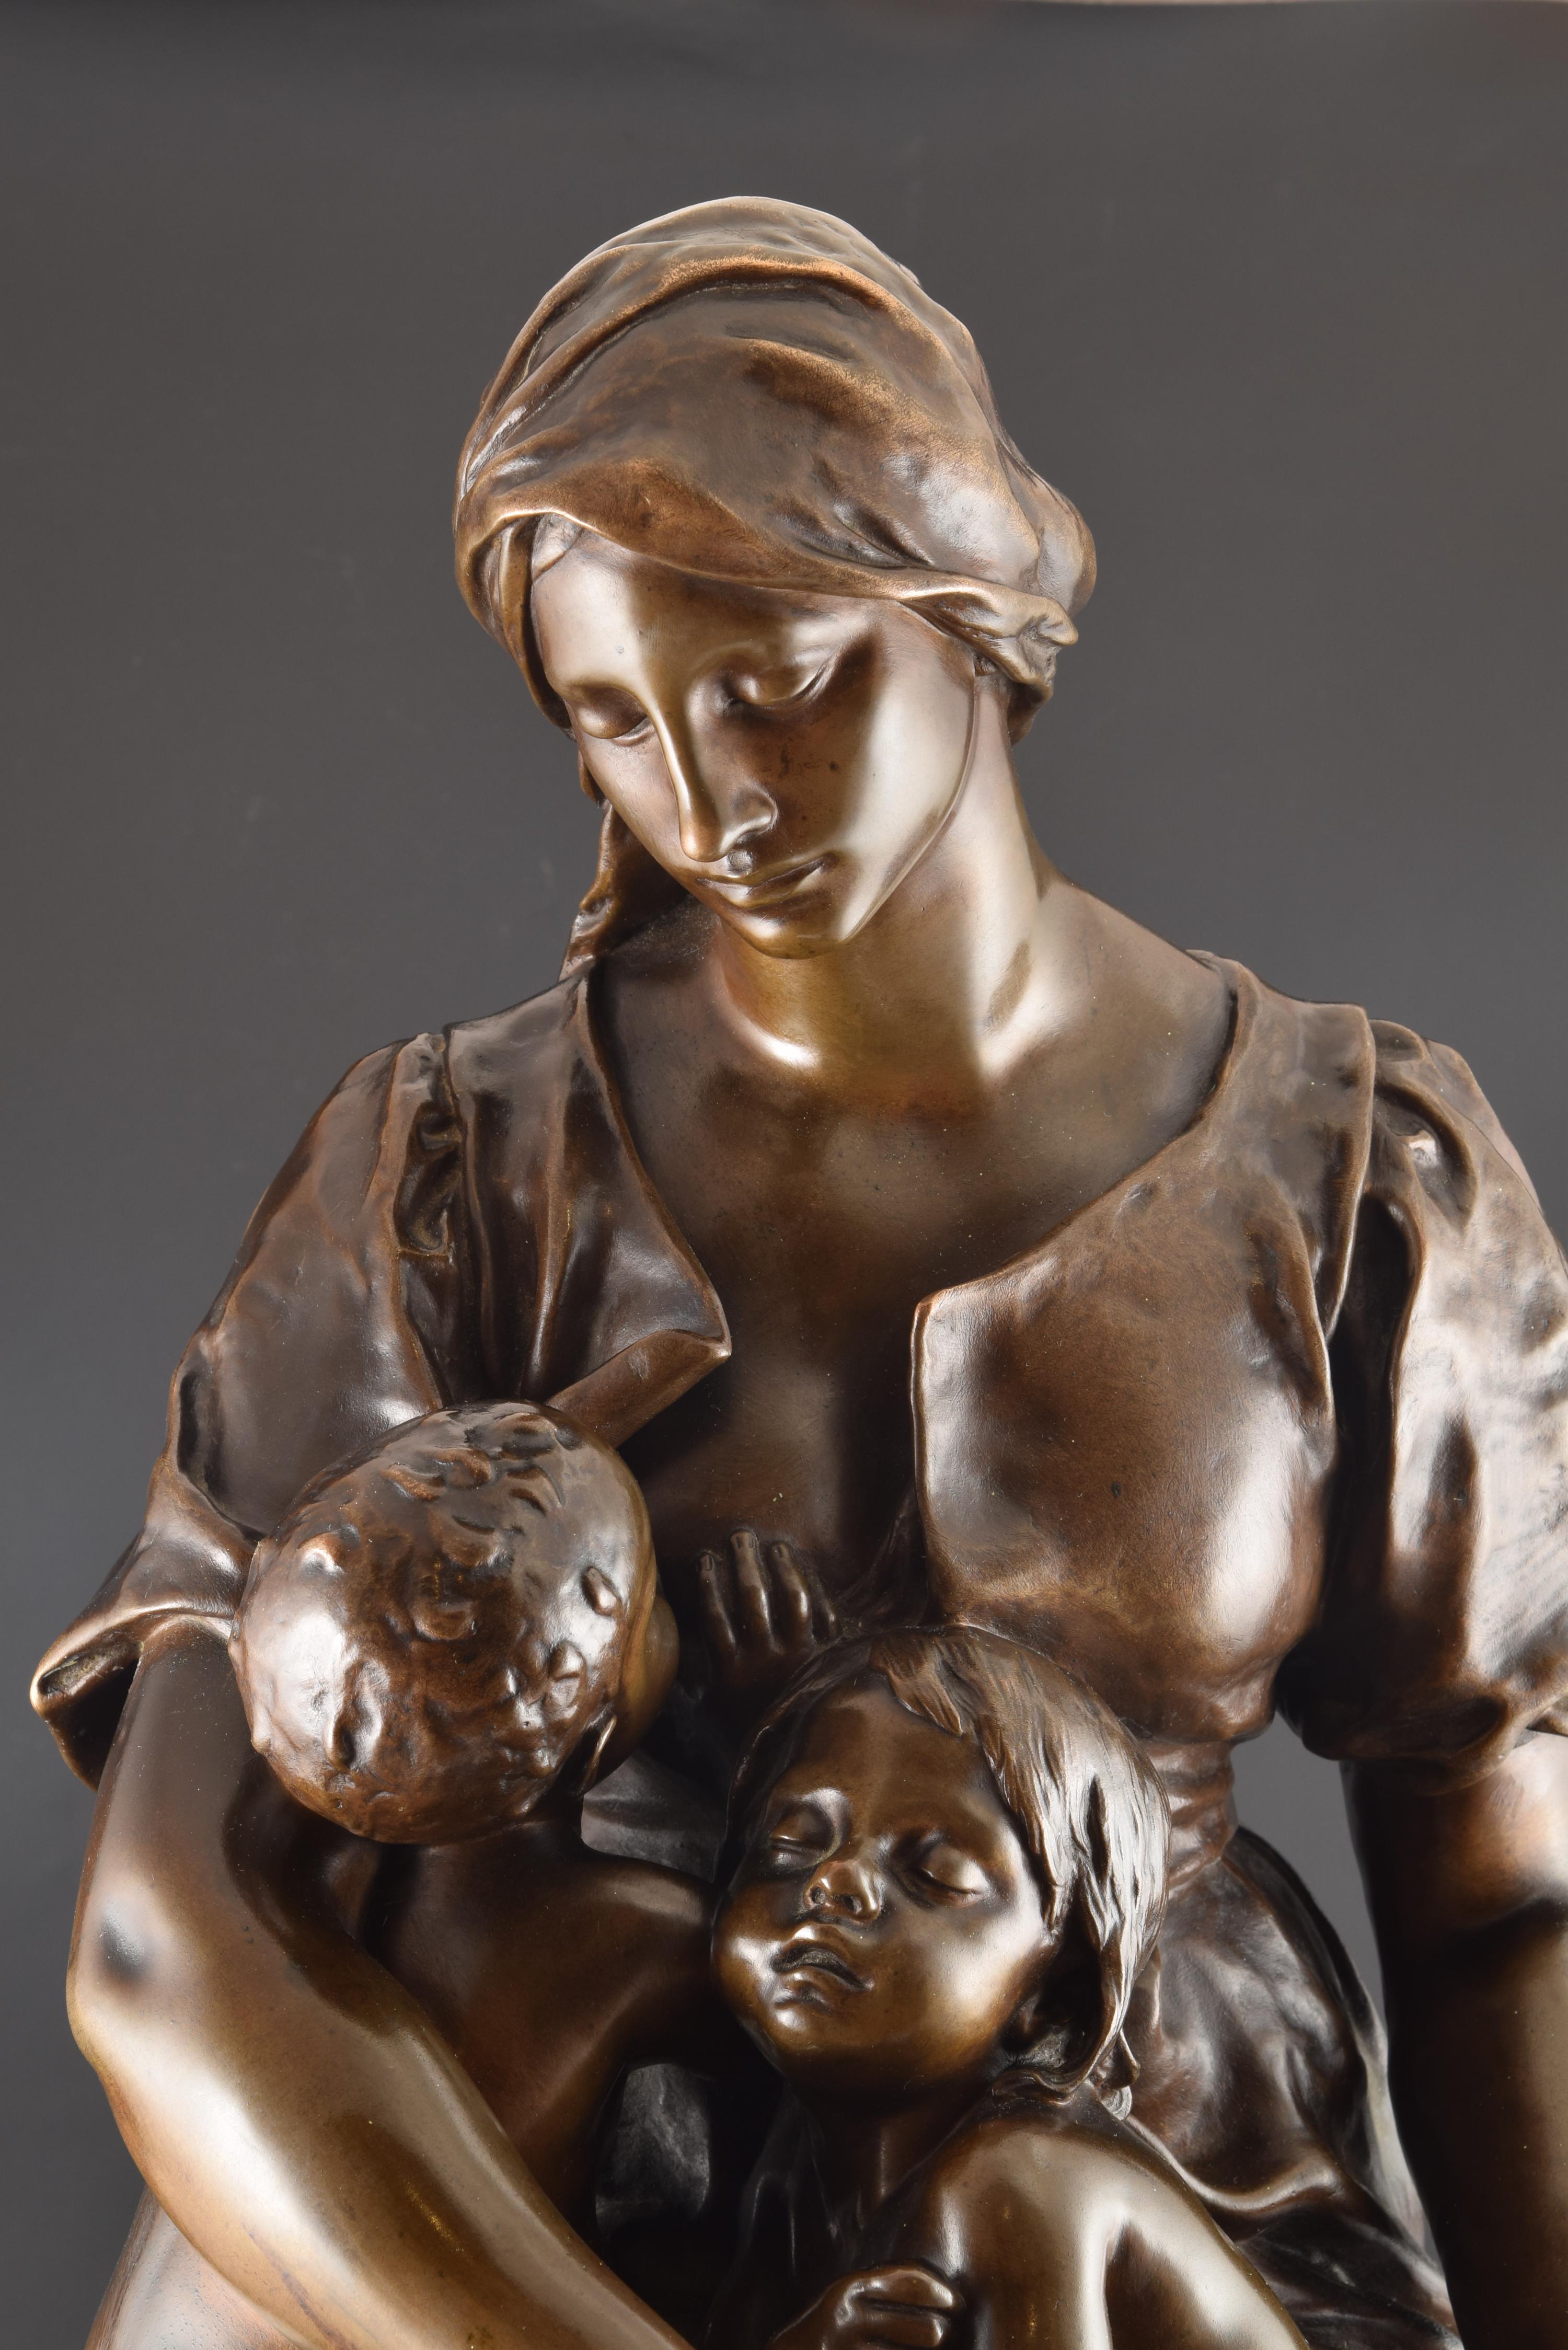 “Charity”, Bronze, 19th Century French School, Signed Paul Dubois 2